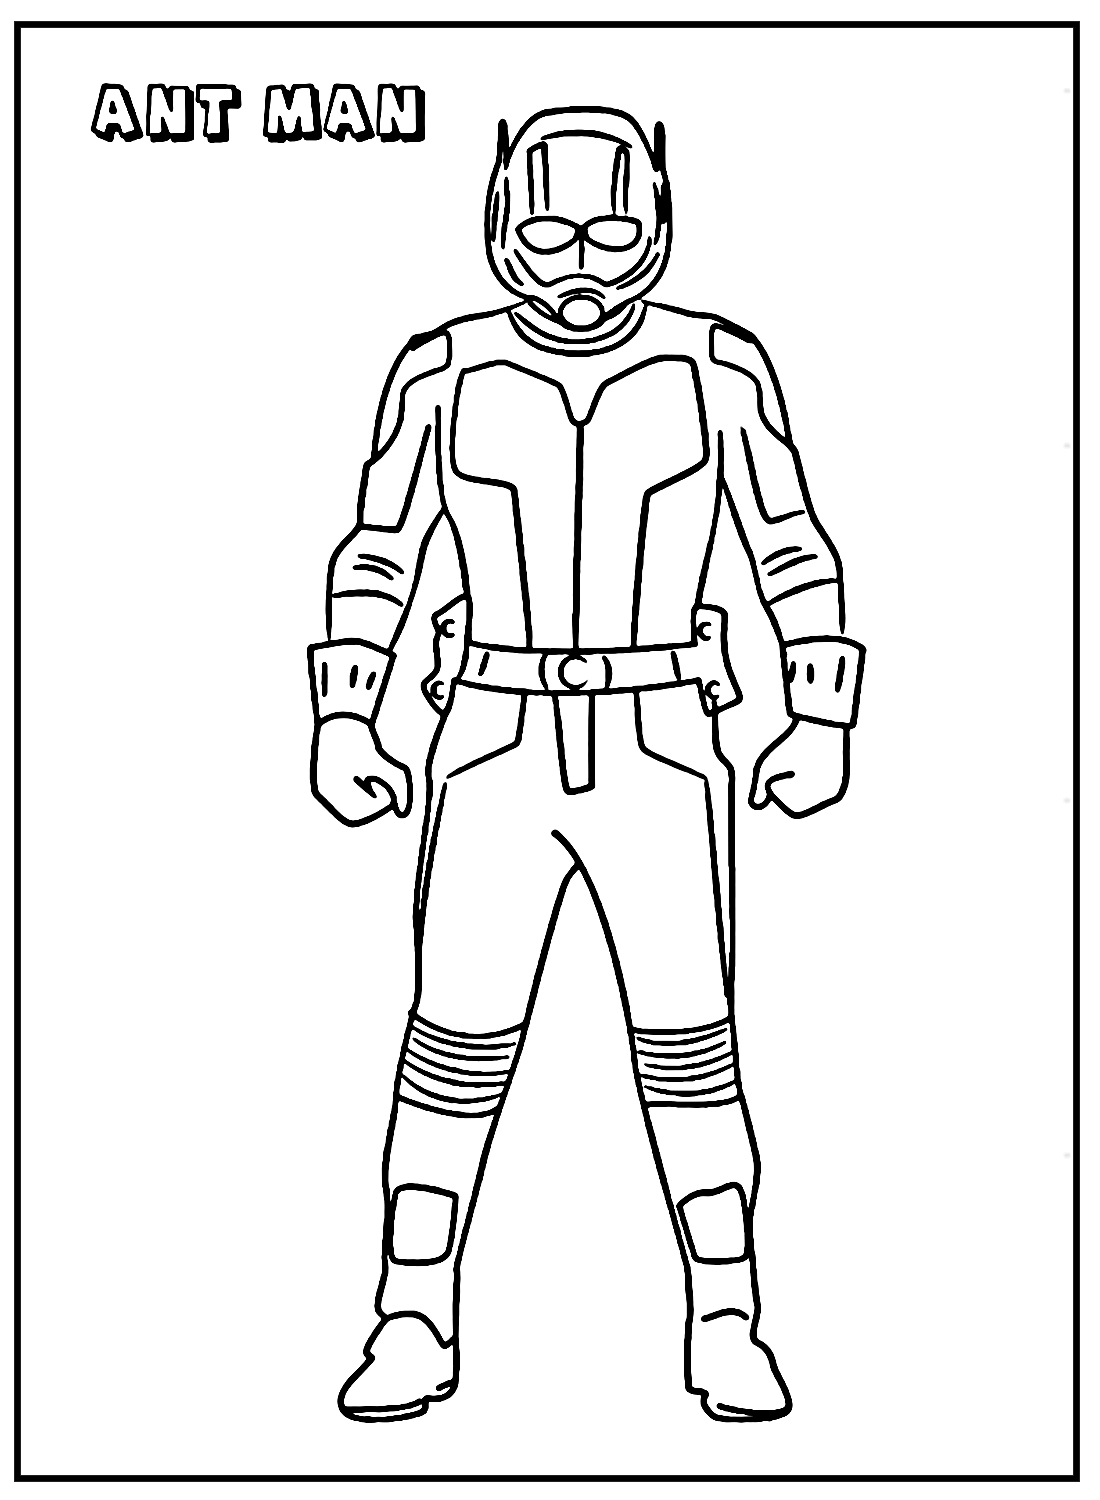 Free Ant Man Coloring Pages - Ant-man Coloring Pages - Coloring Pages For  Kids And Adults